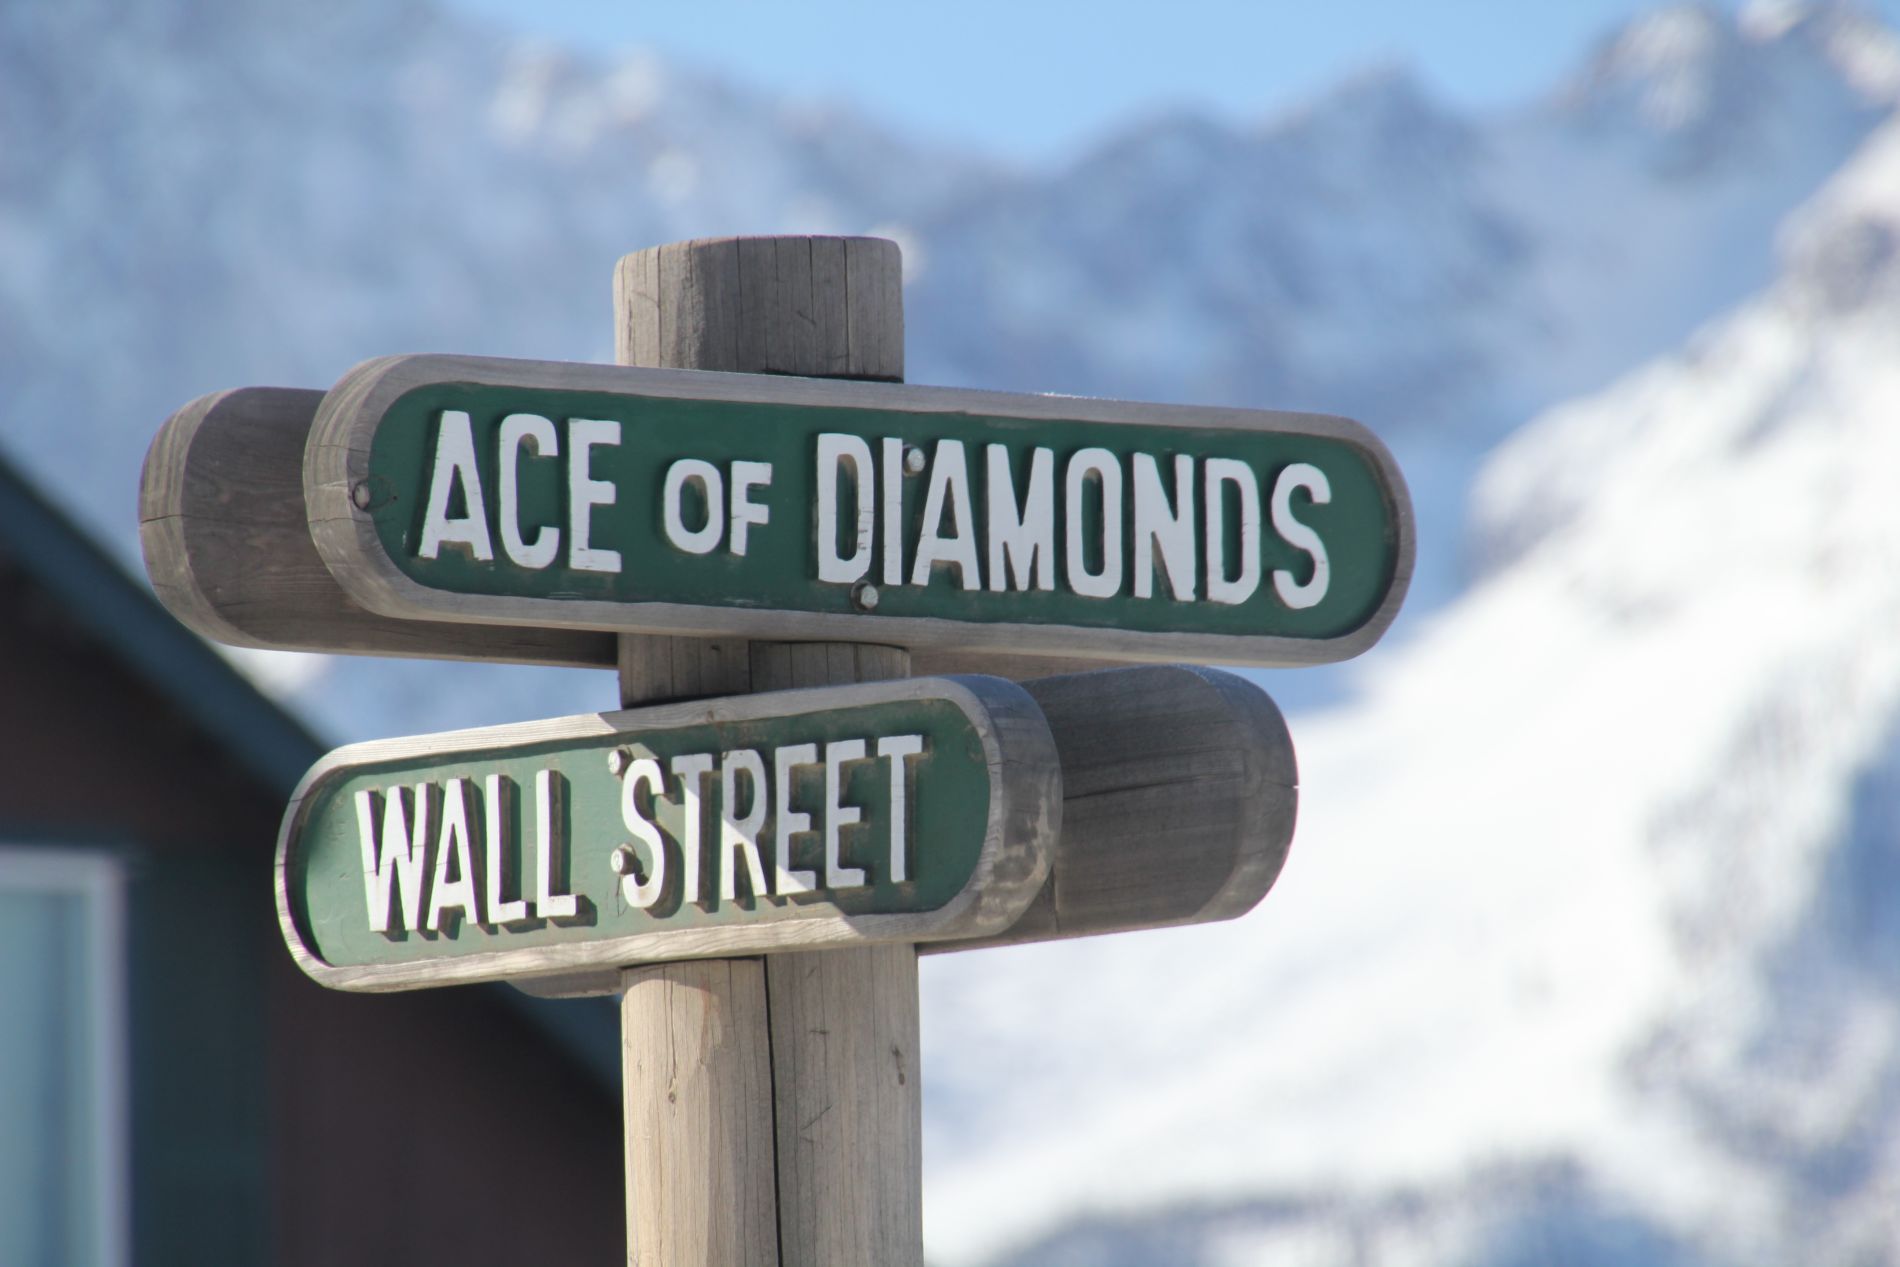 Ace of Diamonds and Wall Street intersection in Stanley, Idaho